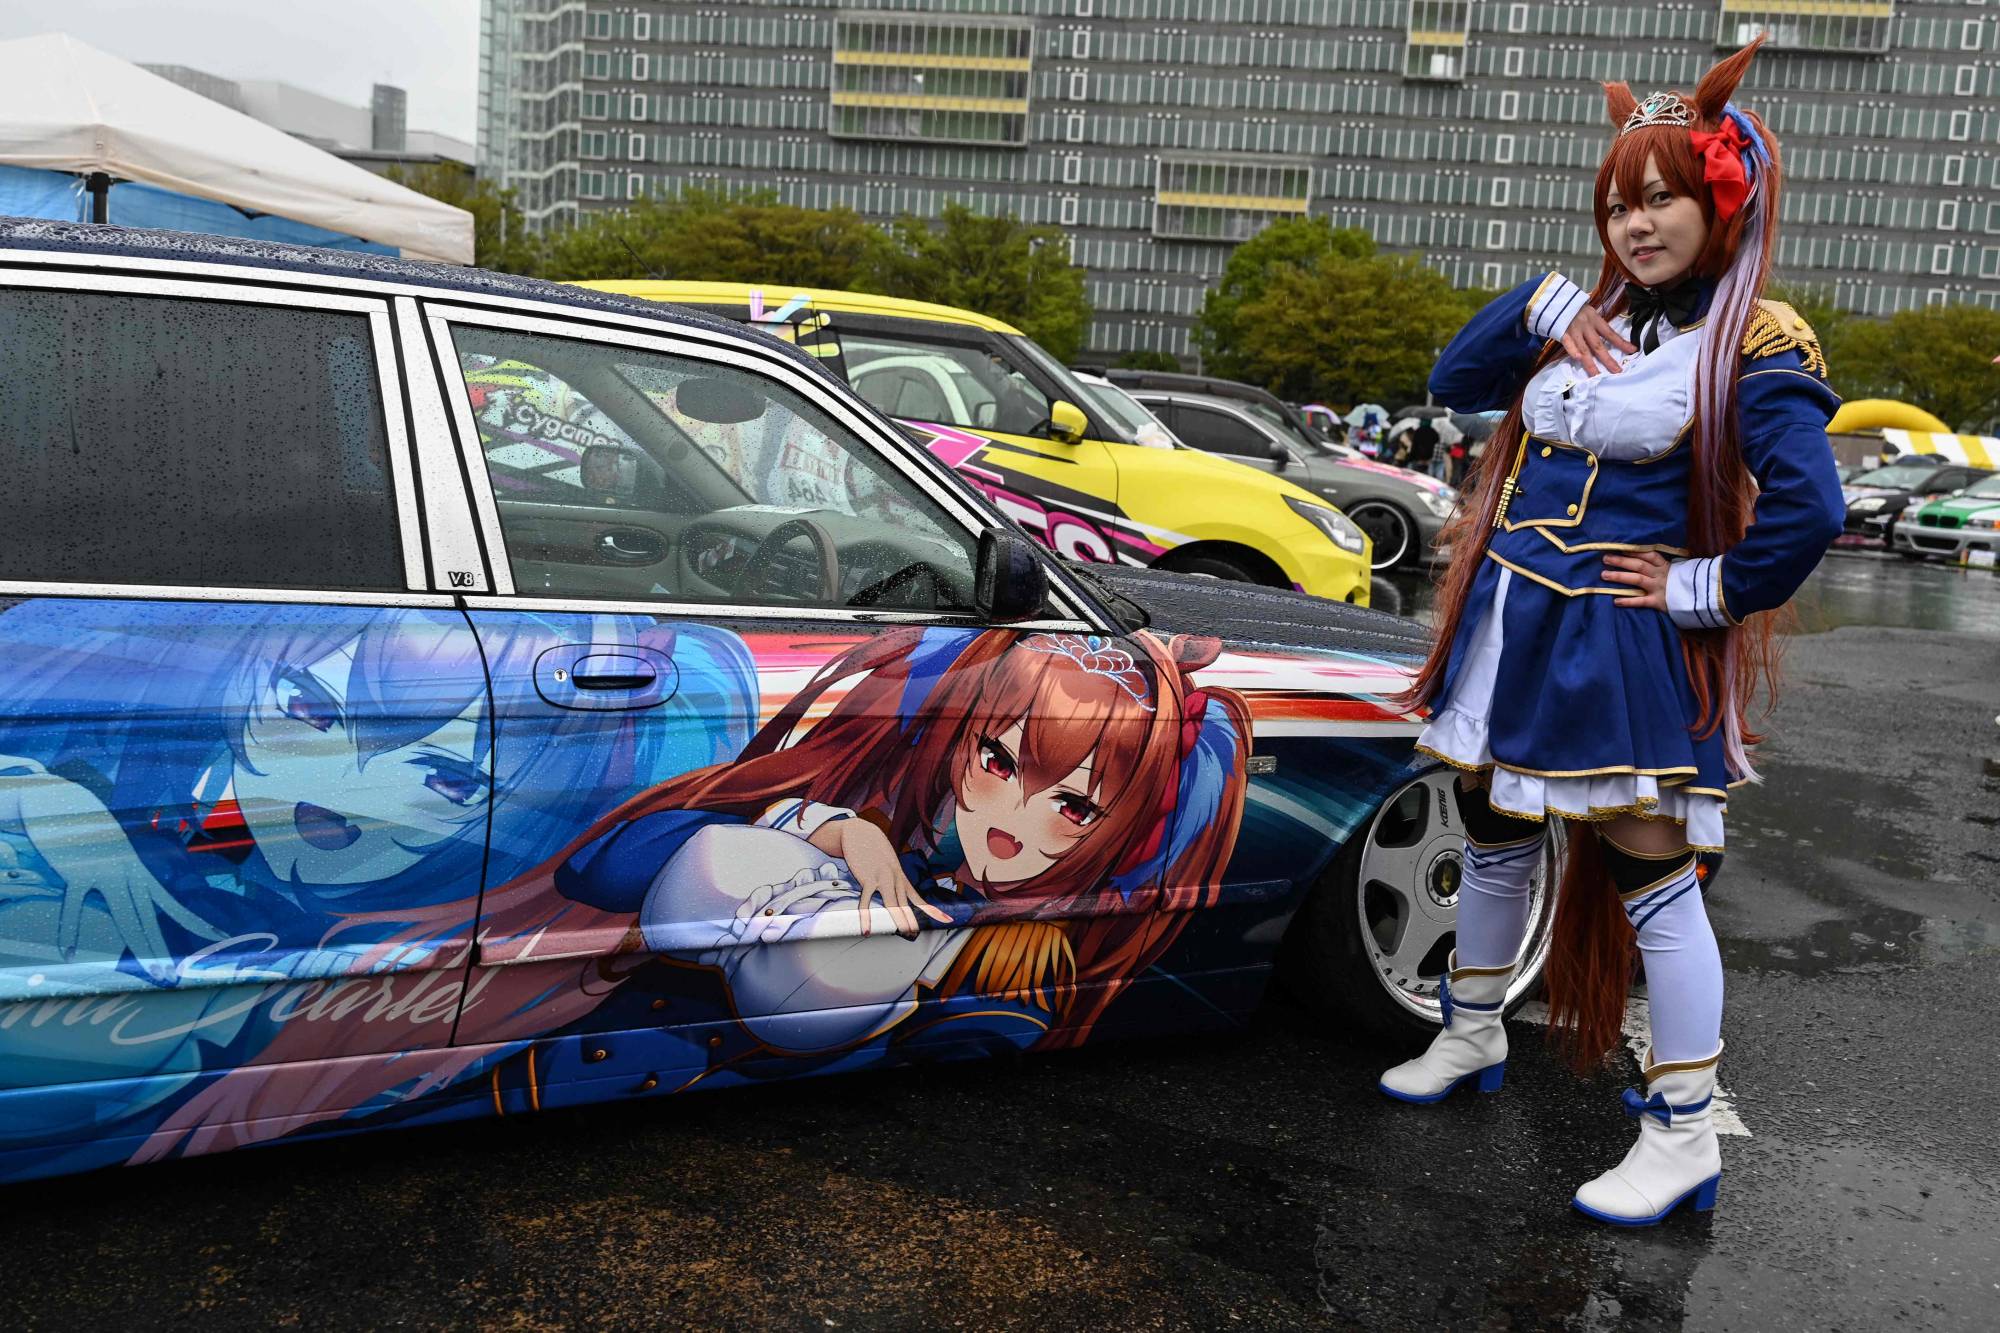 culture  When did people start putting anime characters on vehicles   Anime  Manga Stack Exchange